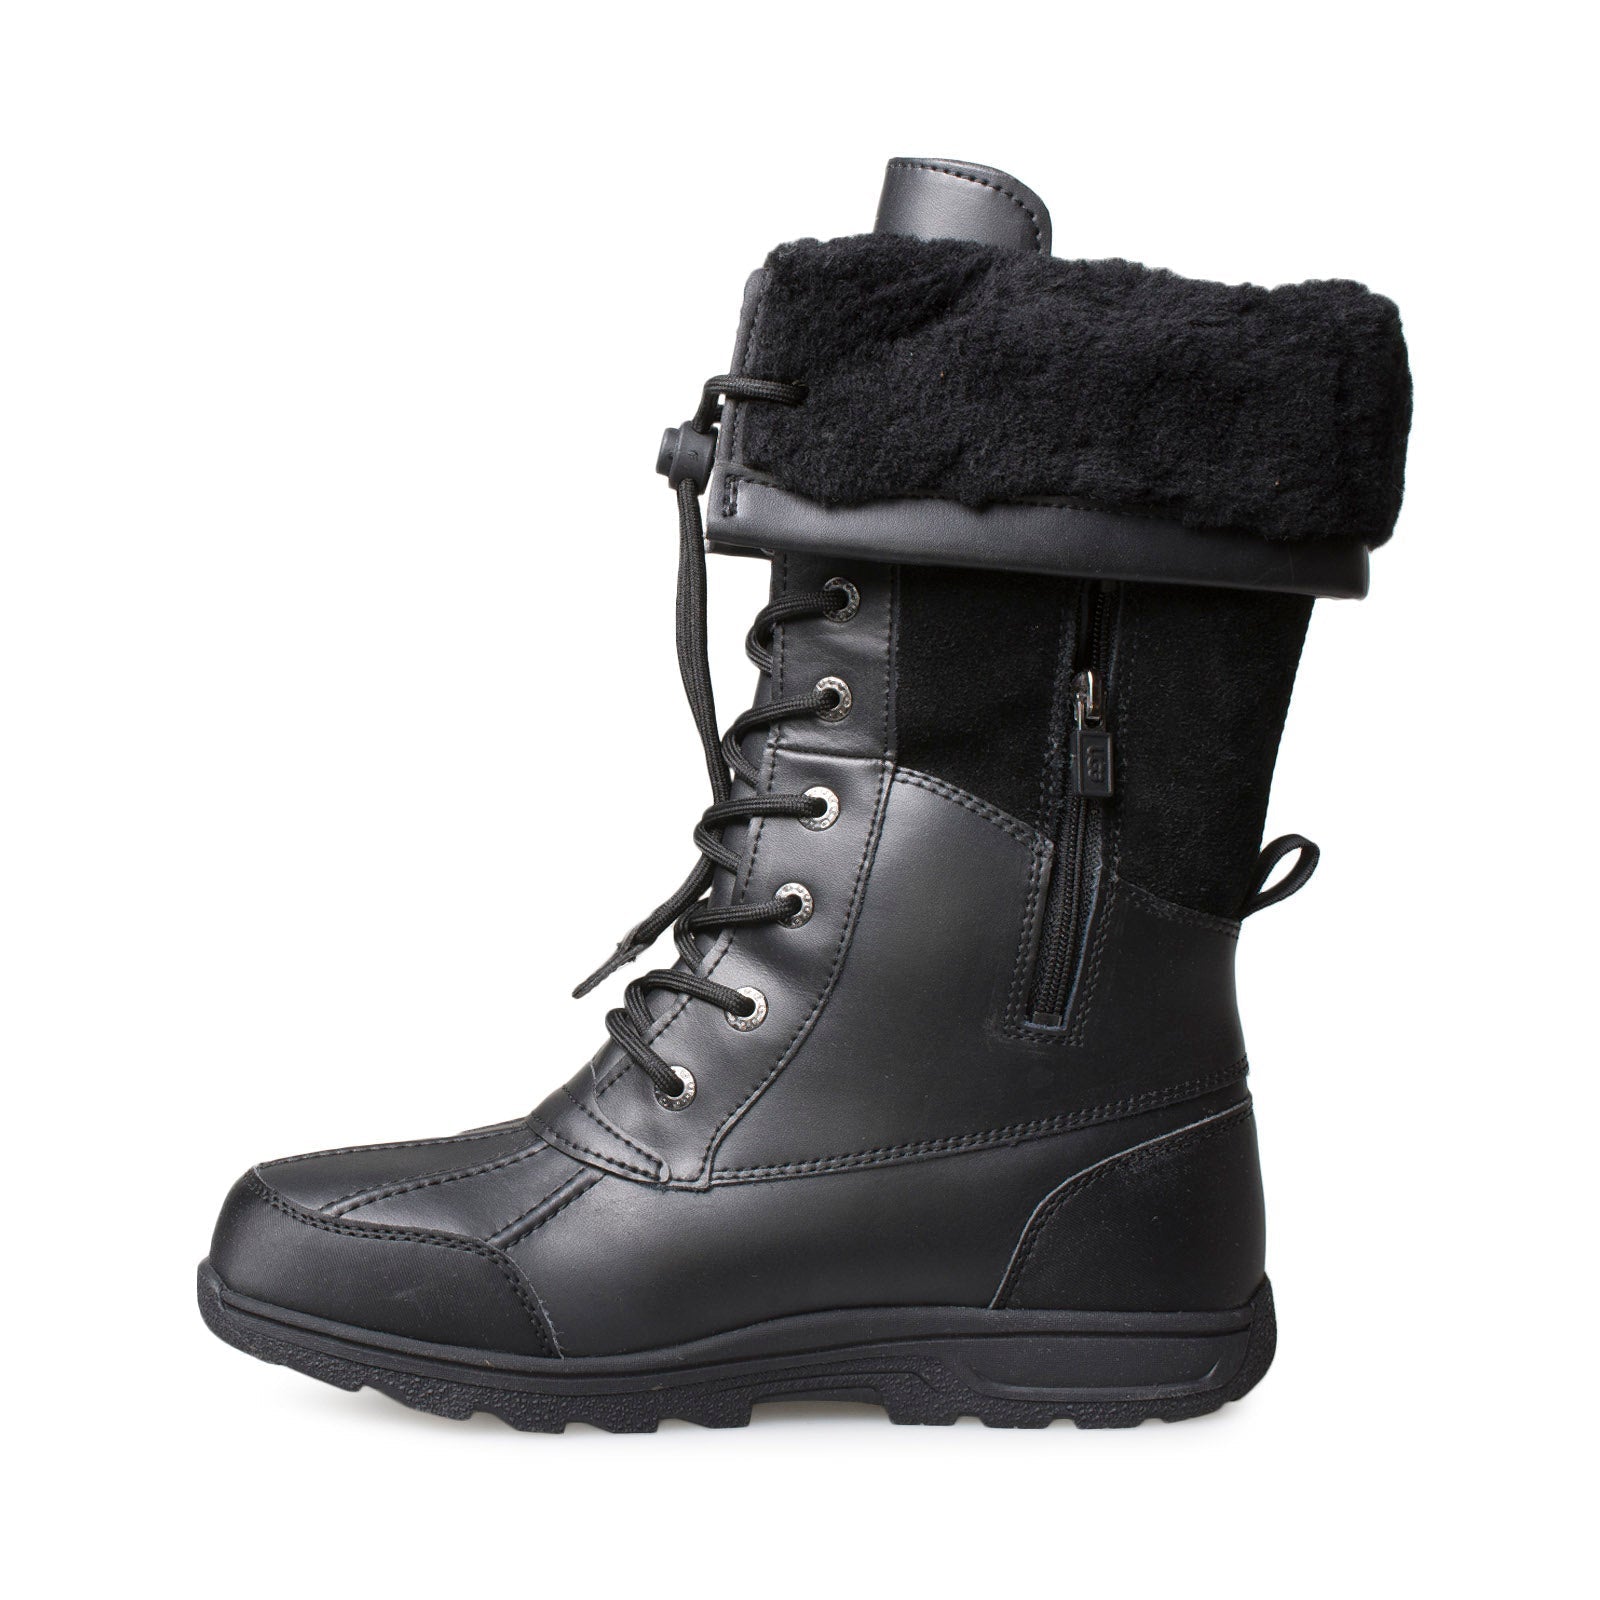 UGG Butte II Toggle Tall Black Boots - Youth